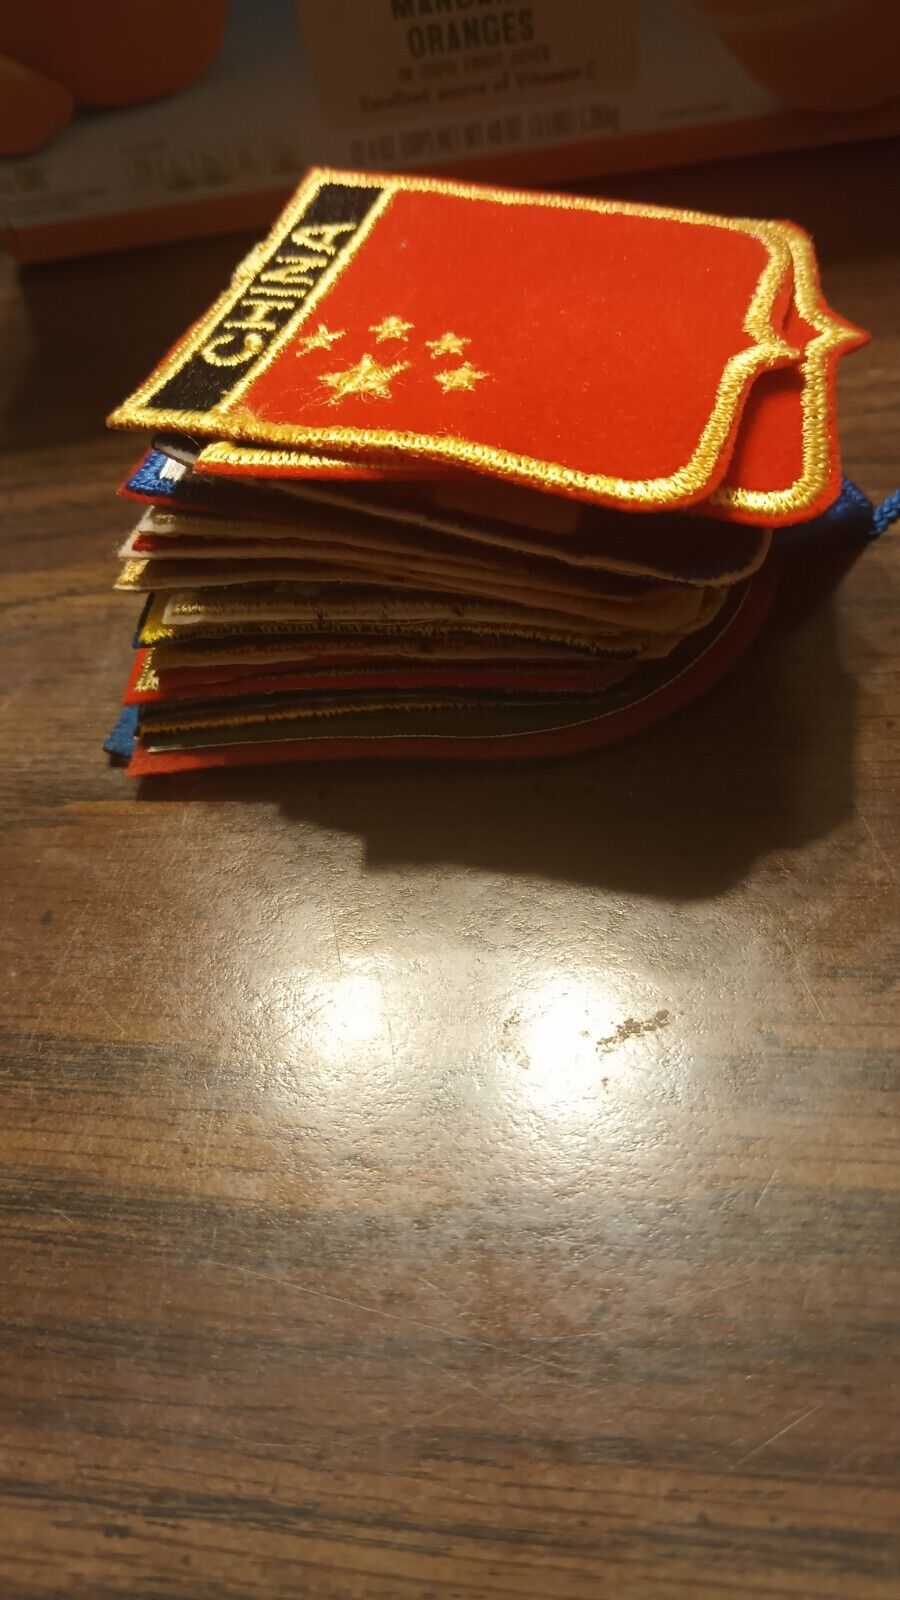 Lot of 18 Foreign Patches International Travel